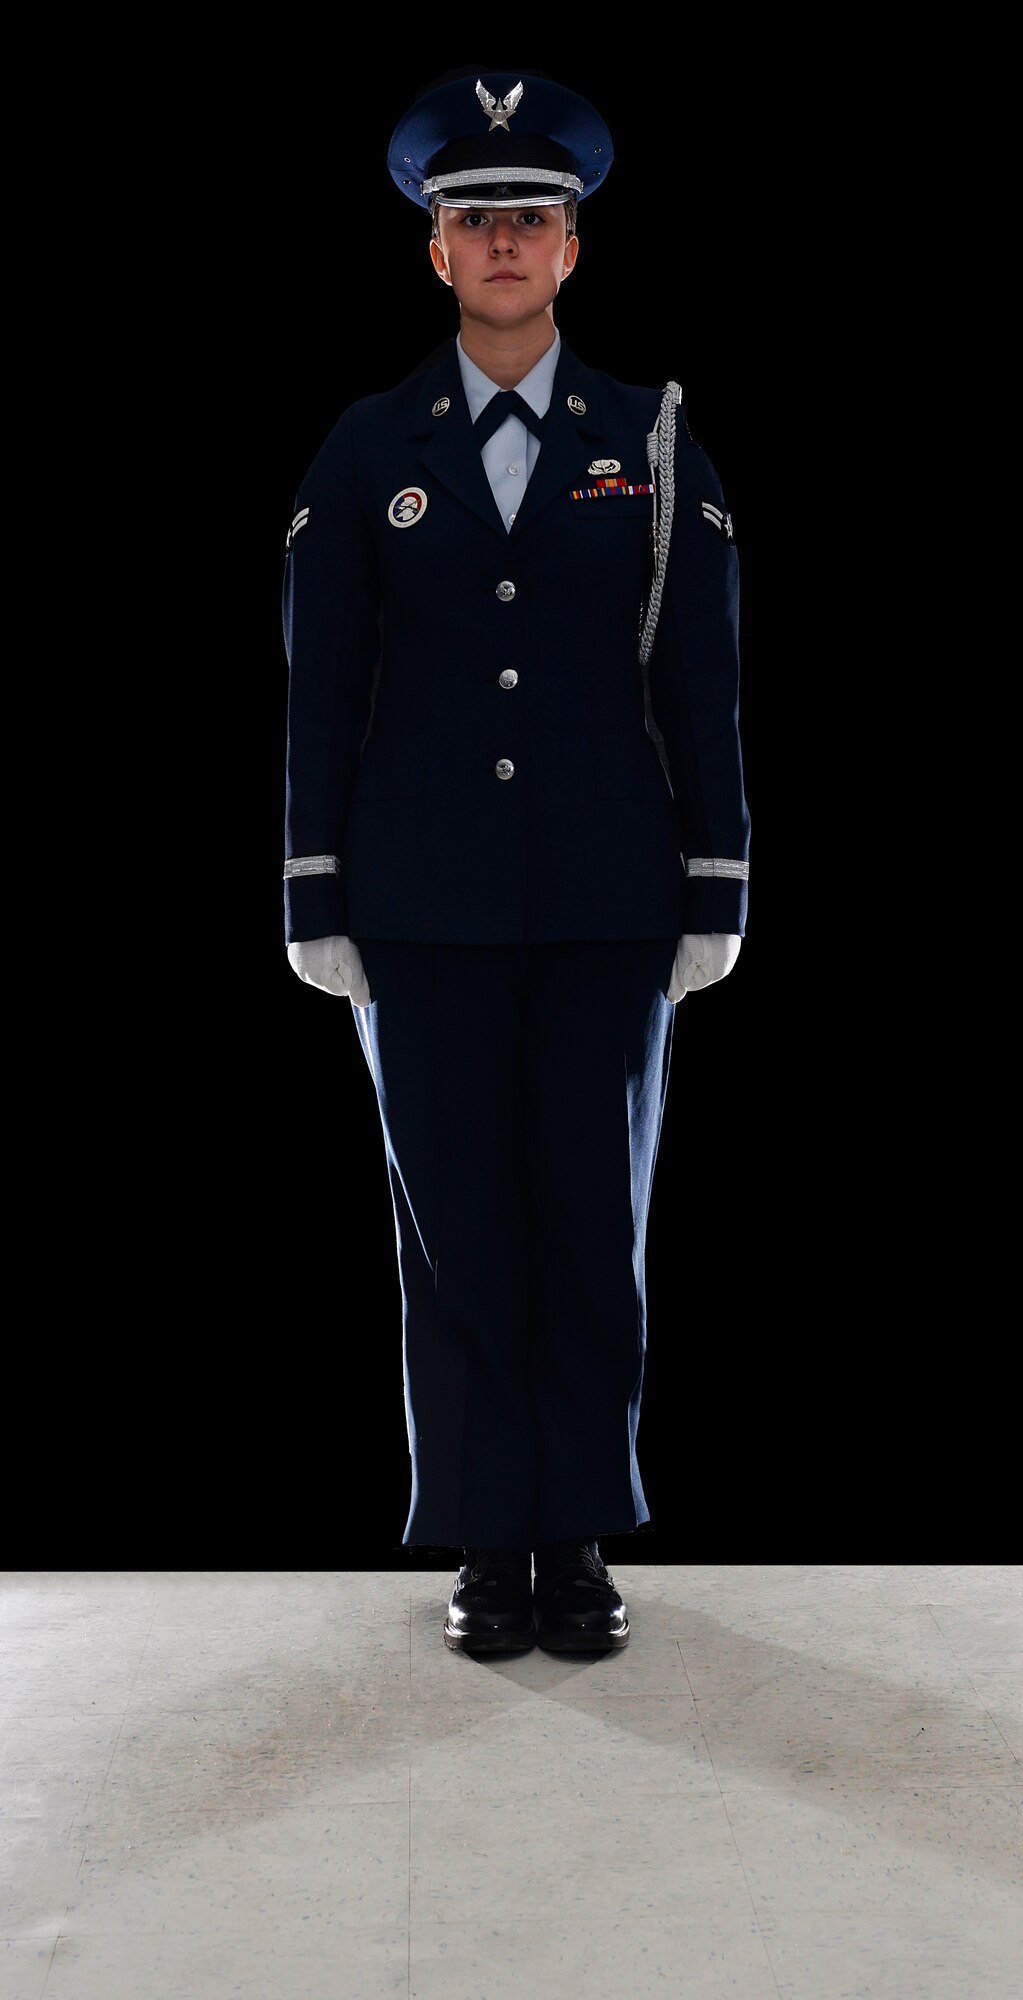 Airman 1st Class Julia C. Schultz, assigned to the 157th Force Support Squadron, poses for a portait on June 7, 2018 at Pease Air National Guard Base, N.H. Schultz has served as a member of the Pease Base Honor Guard for more than a year. (N.H. Air National Guard photo illustration by Staff Sgt. Kayla White)